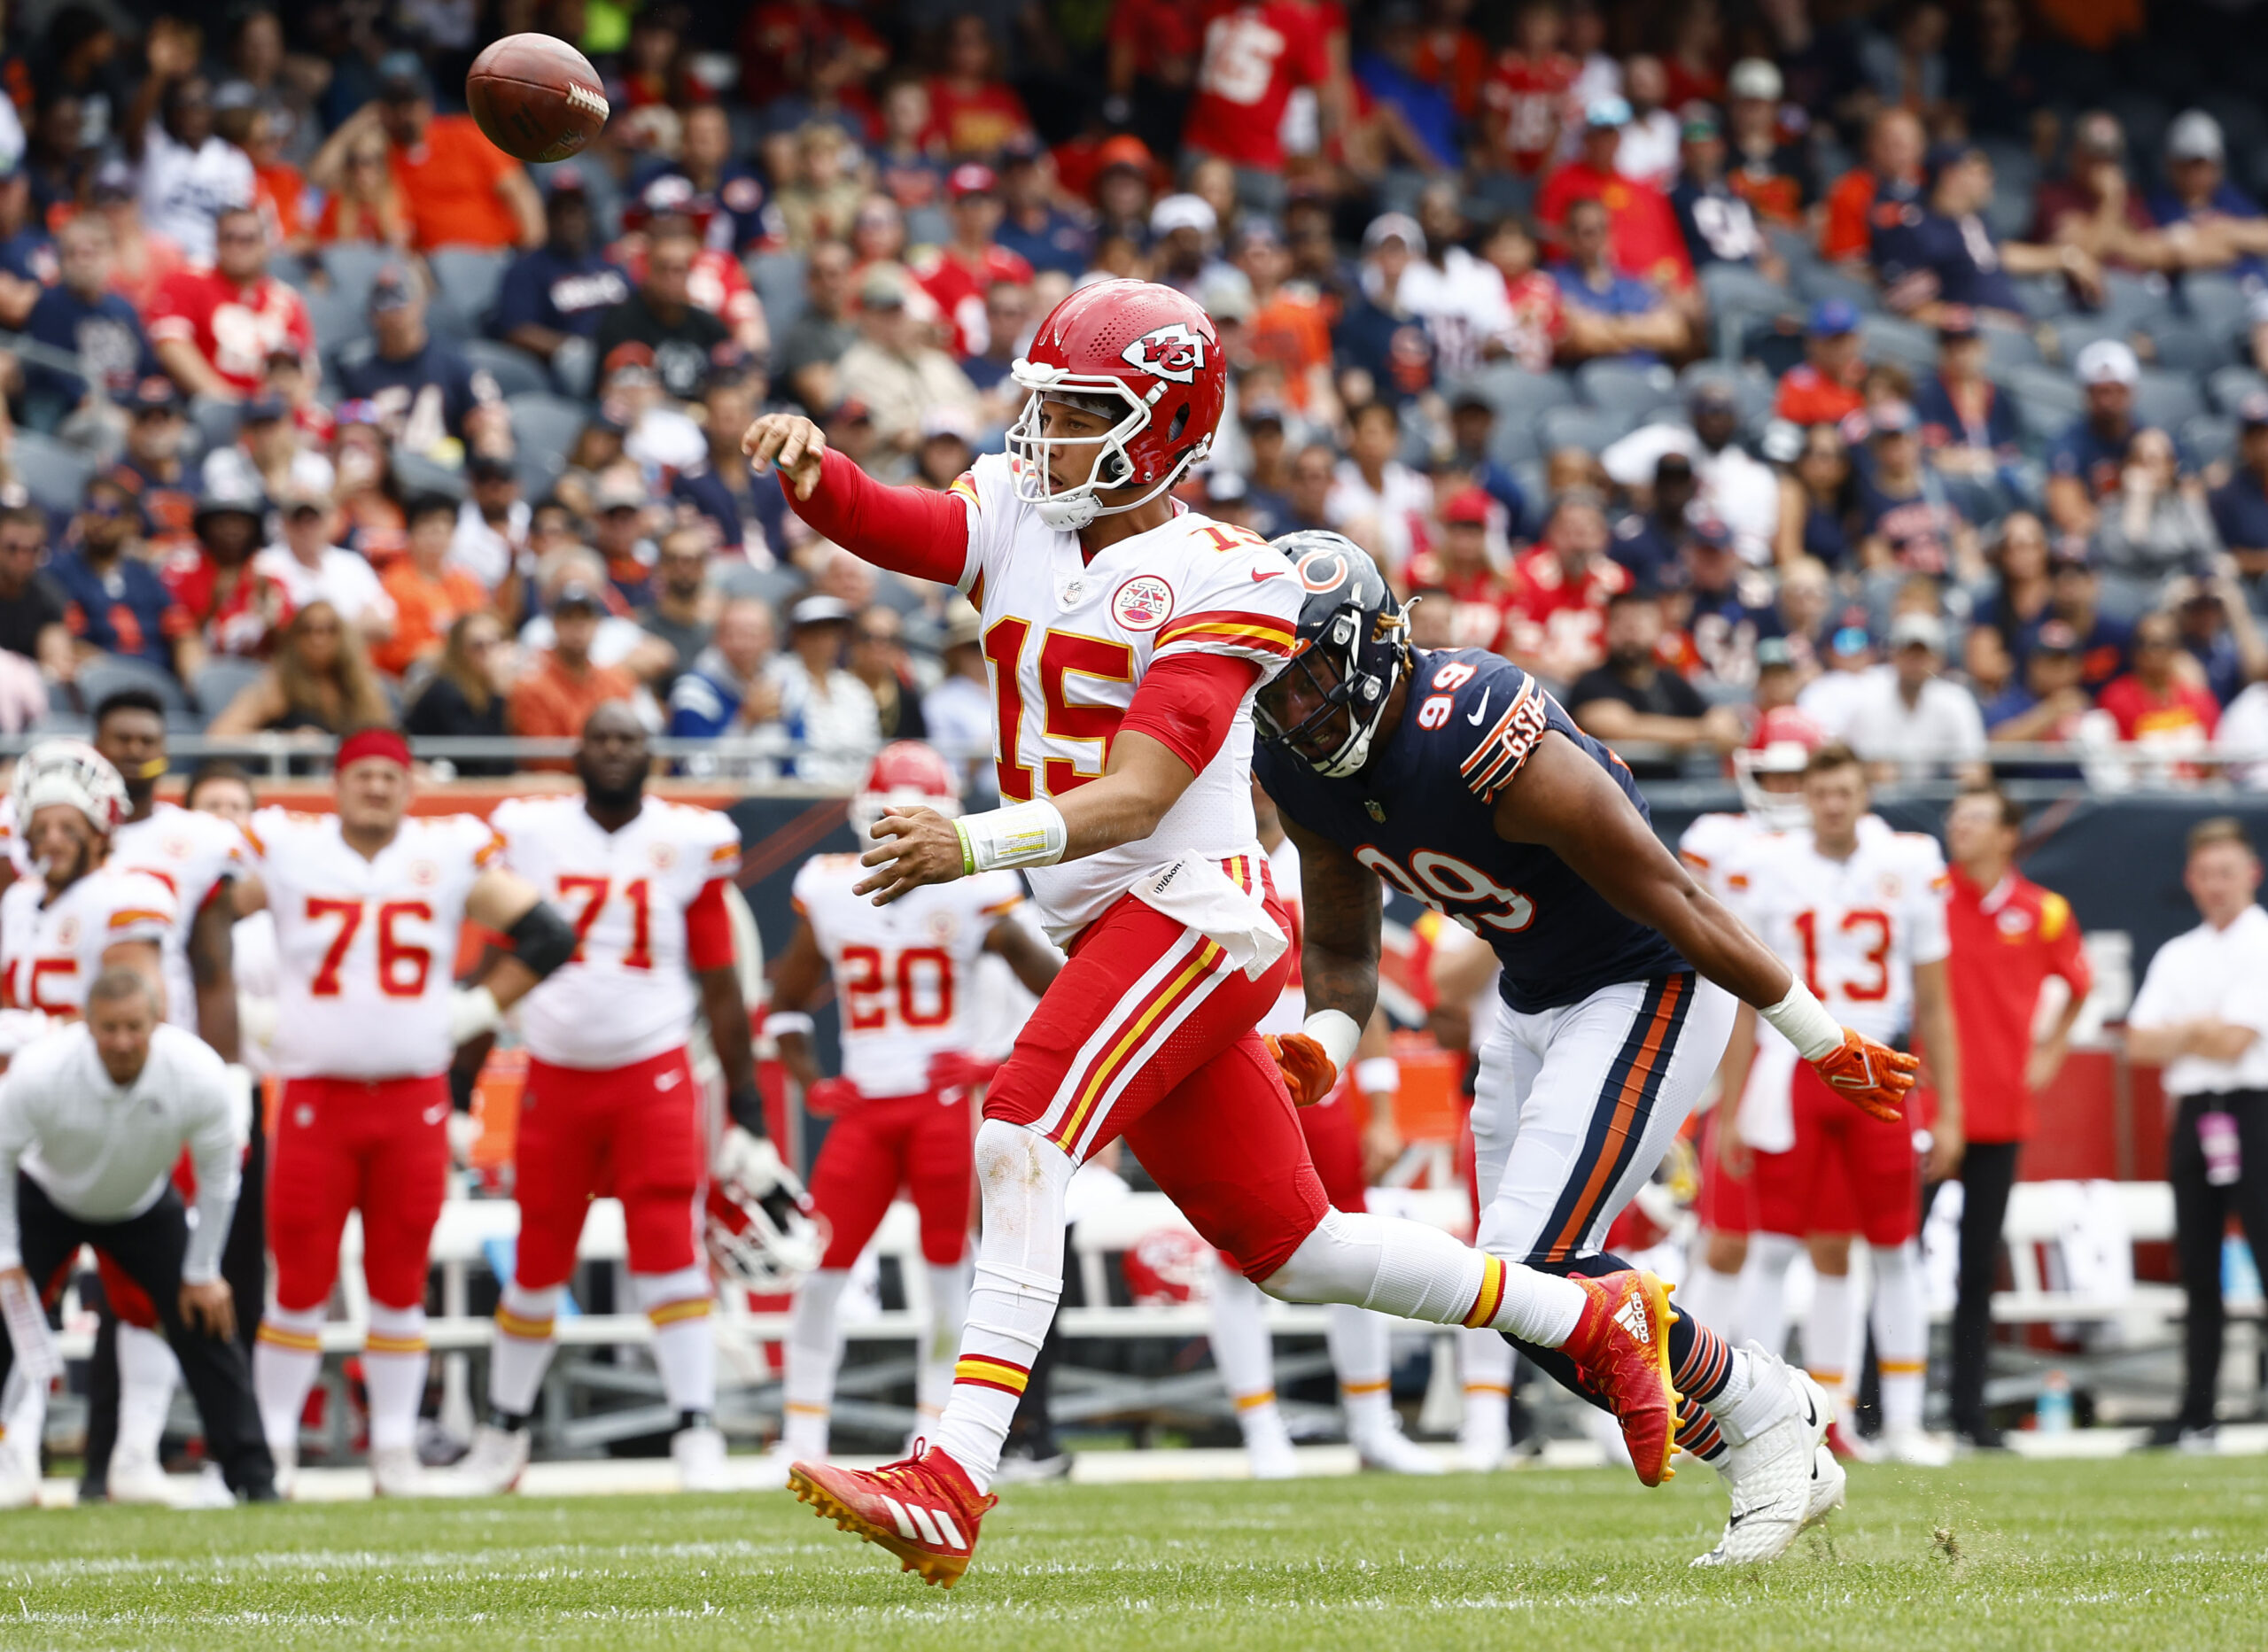 How the Chiefs should gameplan for Week 3 vs. Bears